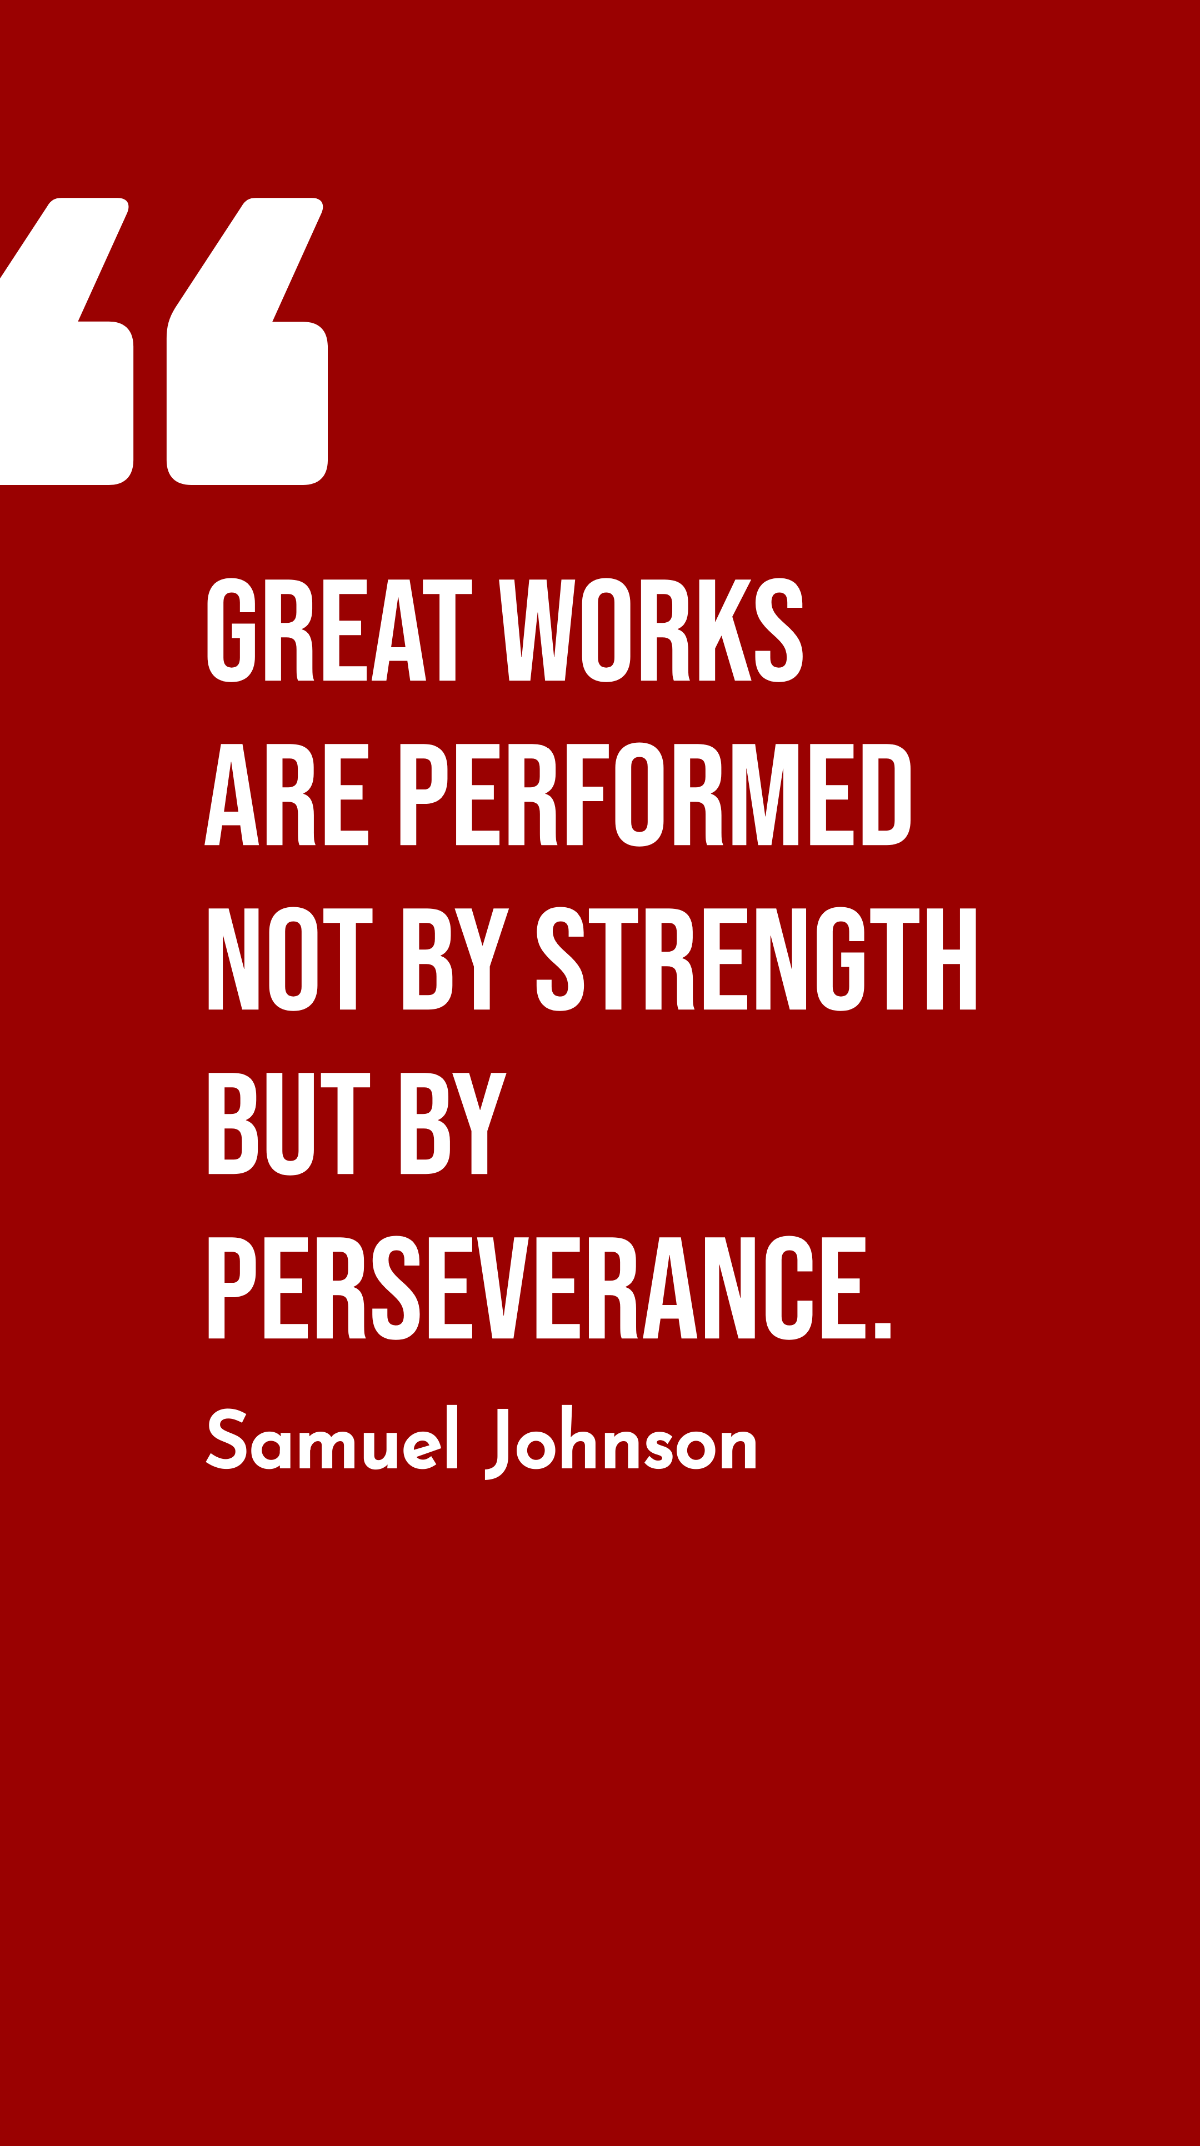 Samuel Johnson - Great works are performed not by strength but by perseverance. Template